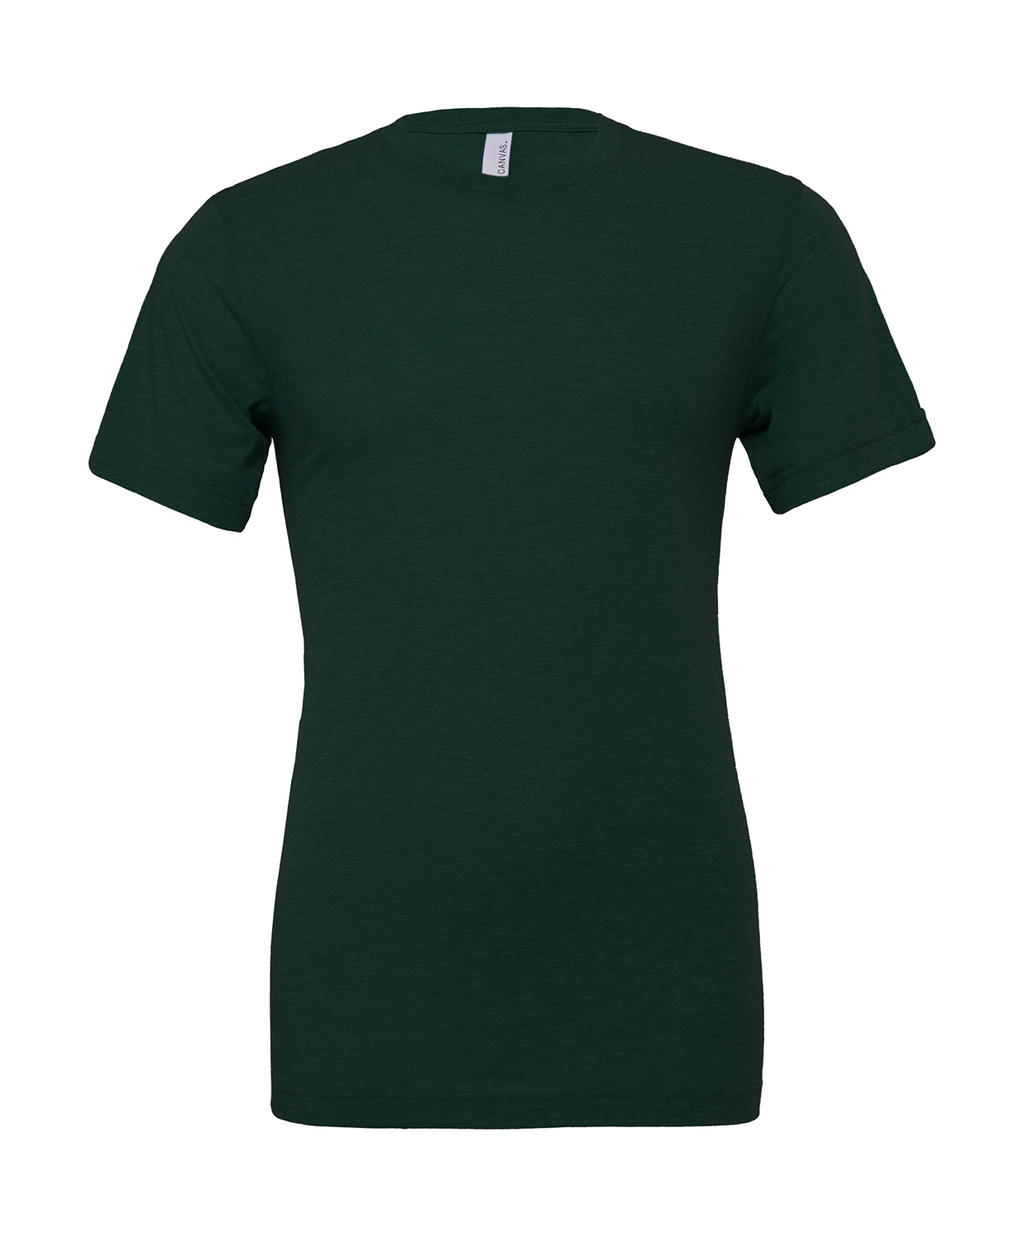  Unisex Triblend Short Sleeve Tee in Farbe Emerald Triblend